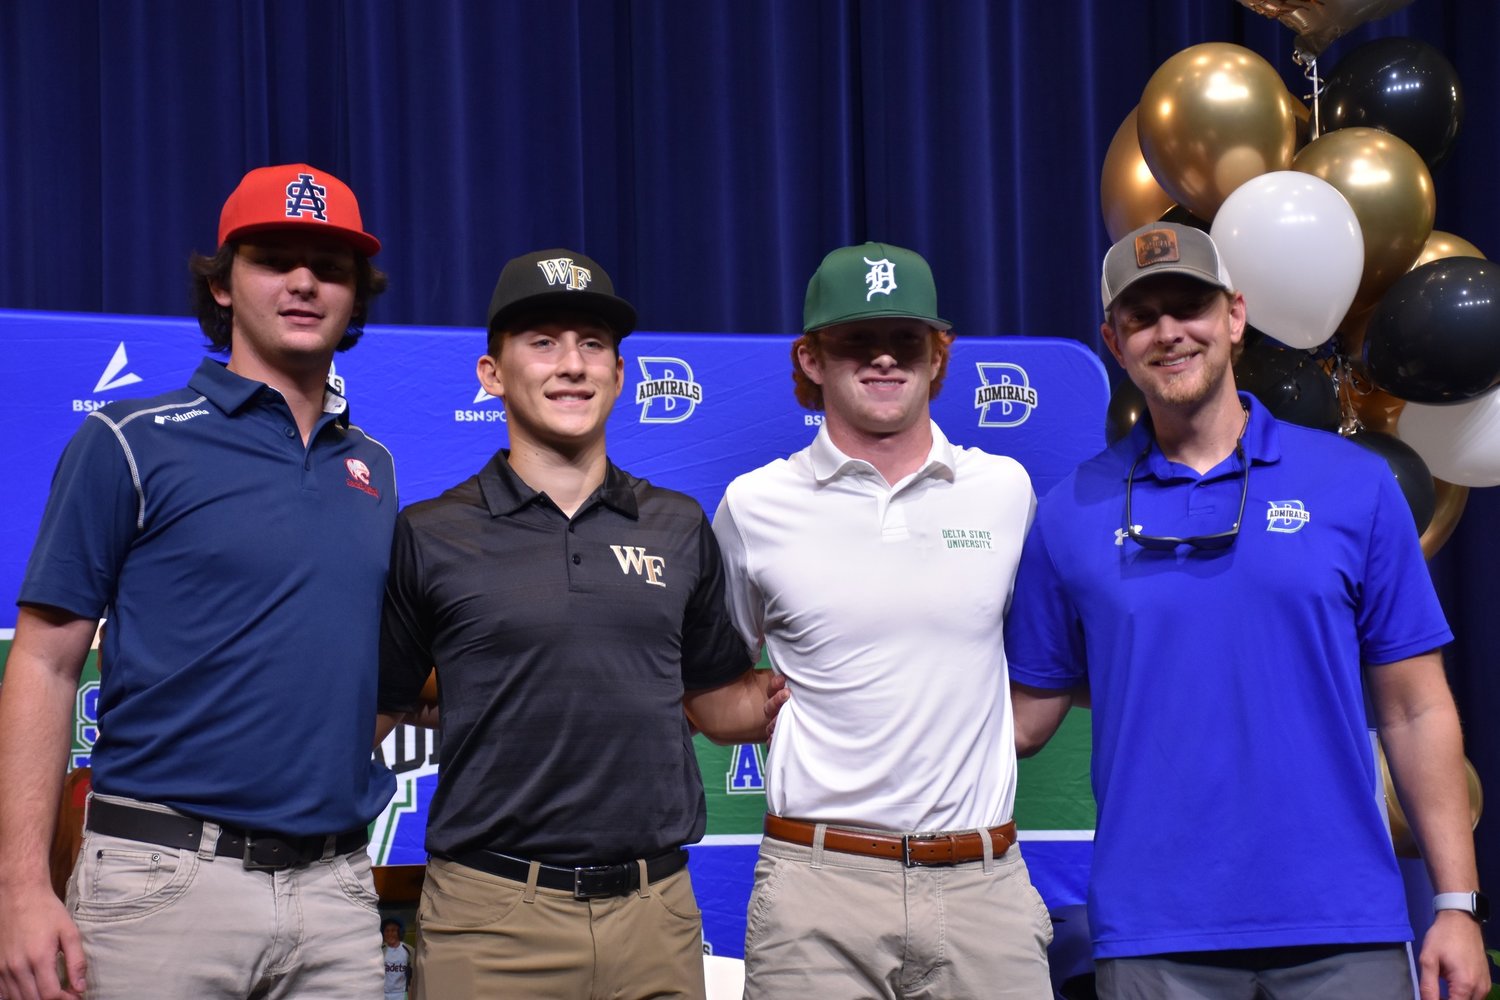 Bayside Academy seniors Jake DeValk (South Alabama), Josh Gunther (Wake Forest) and Jack Woods (Delta State) were joined by Admiral head baseball coach Matt Limbaugh in celebrating National Signing Day Wednesday, Nov. 9, at the high school.